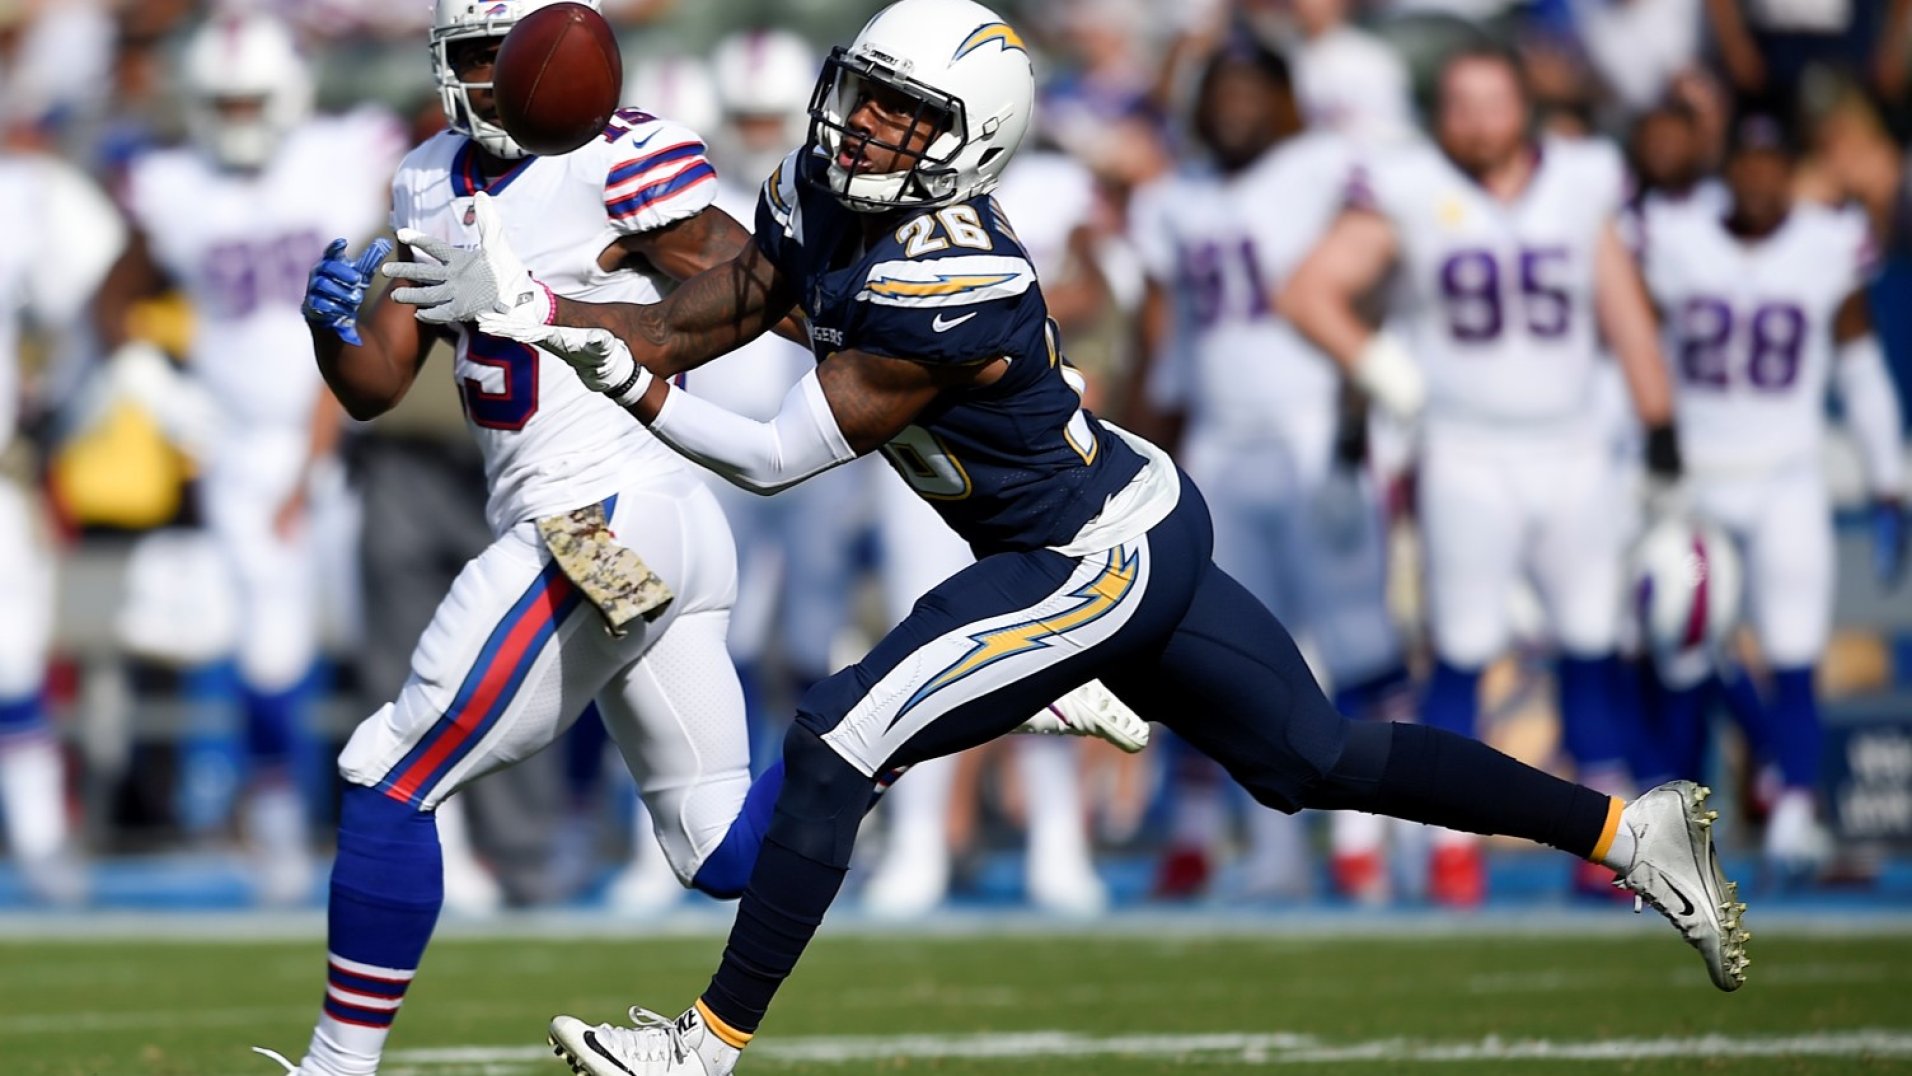 Who is the top cornerback in the NFL? NFL News, Rankings and